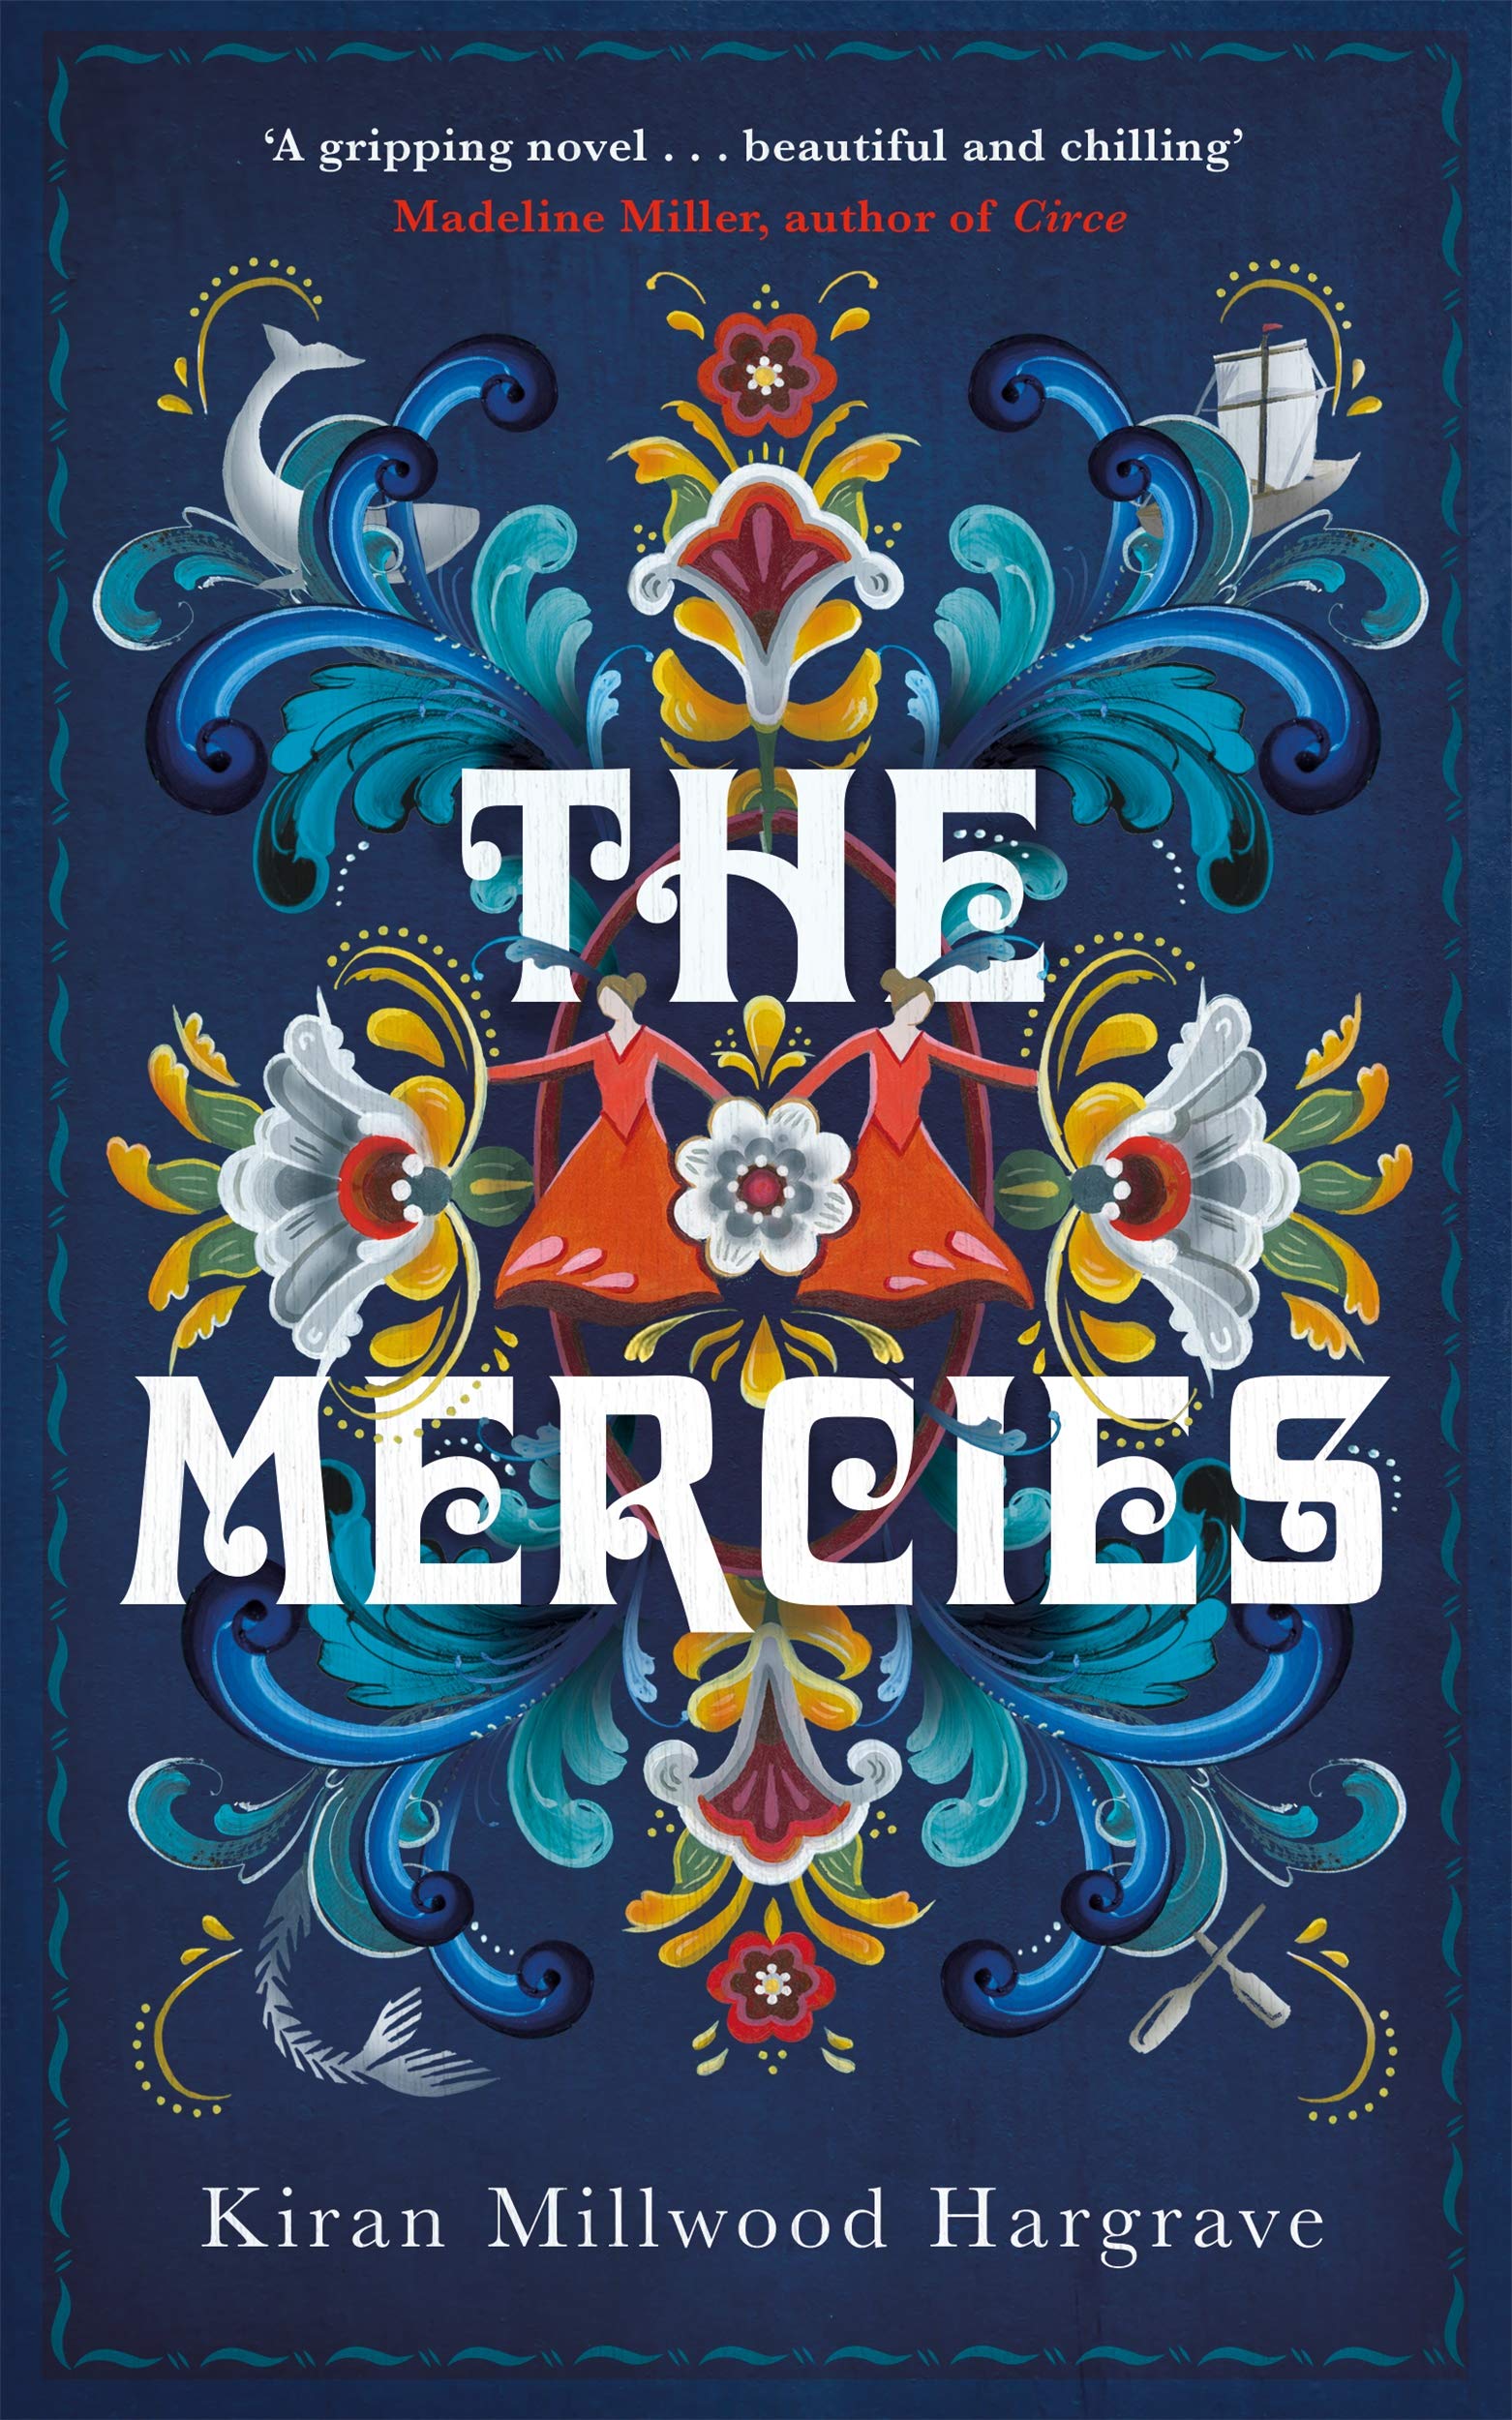 "The Mercies": This novel is inspired by the real events of the Vardø storm and the 1621 witch trials